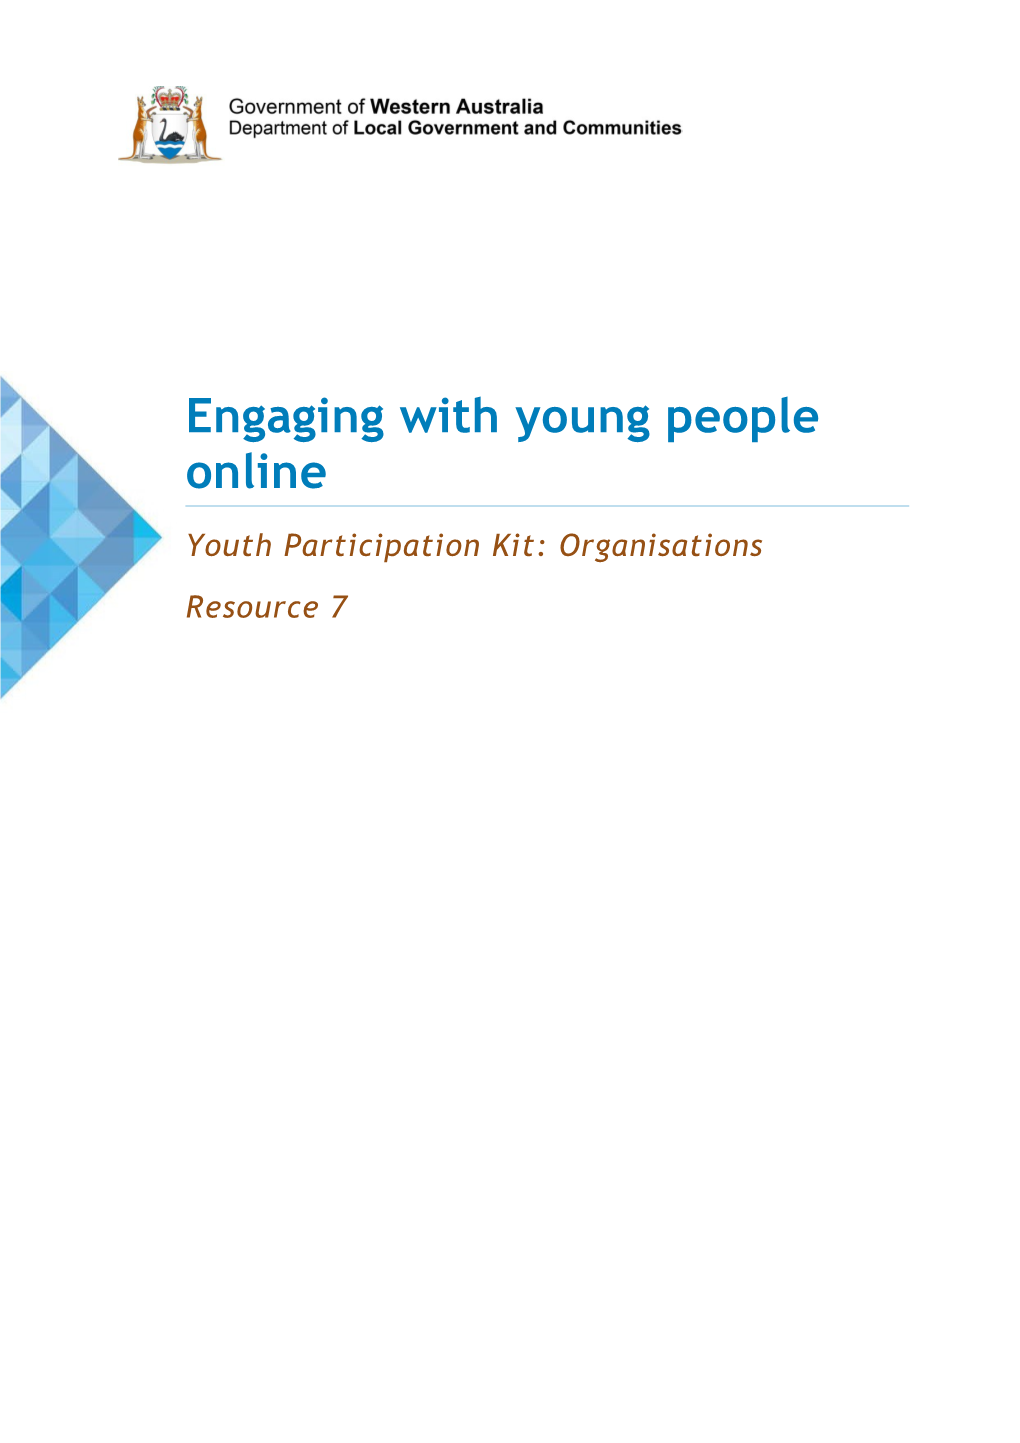 Youth Participation Kit: Organisations